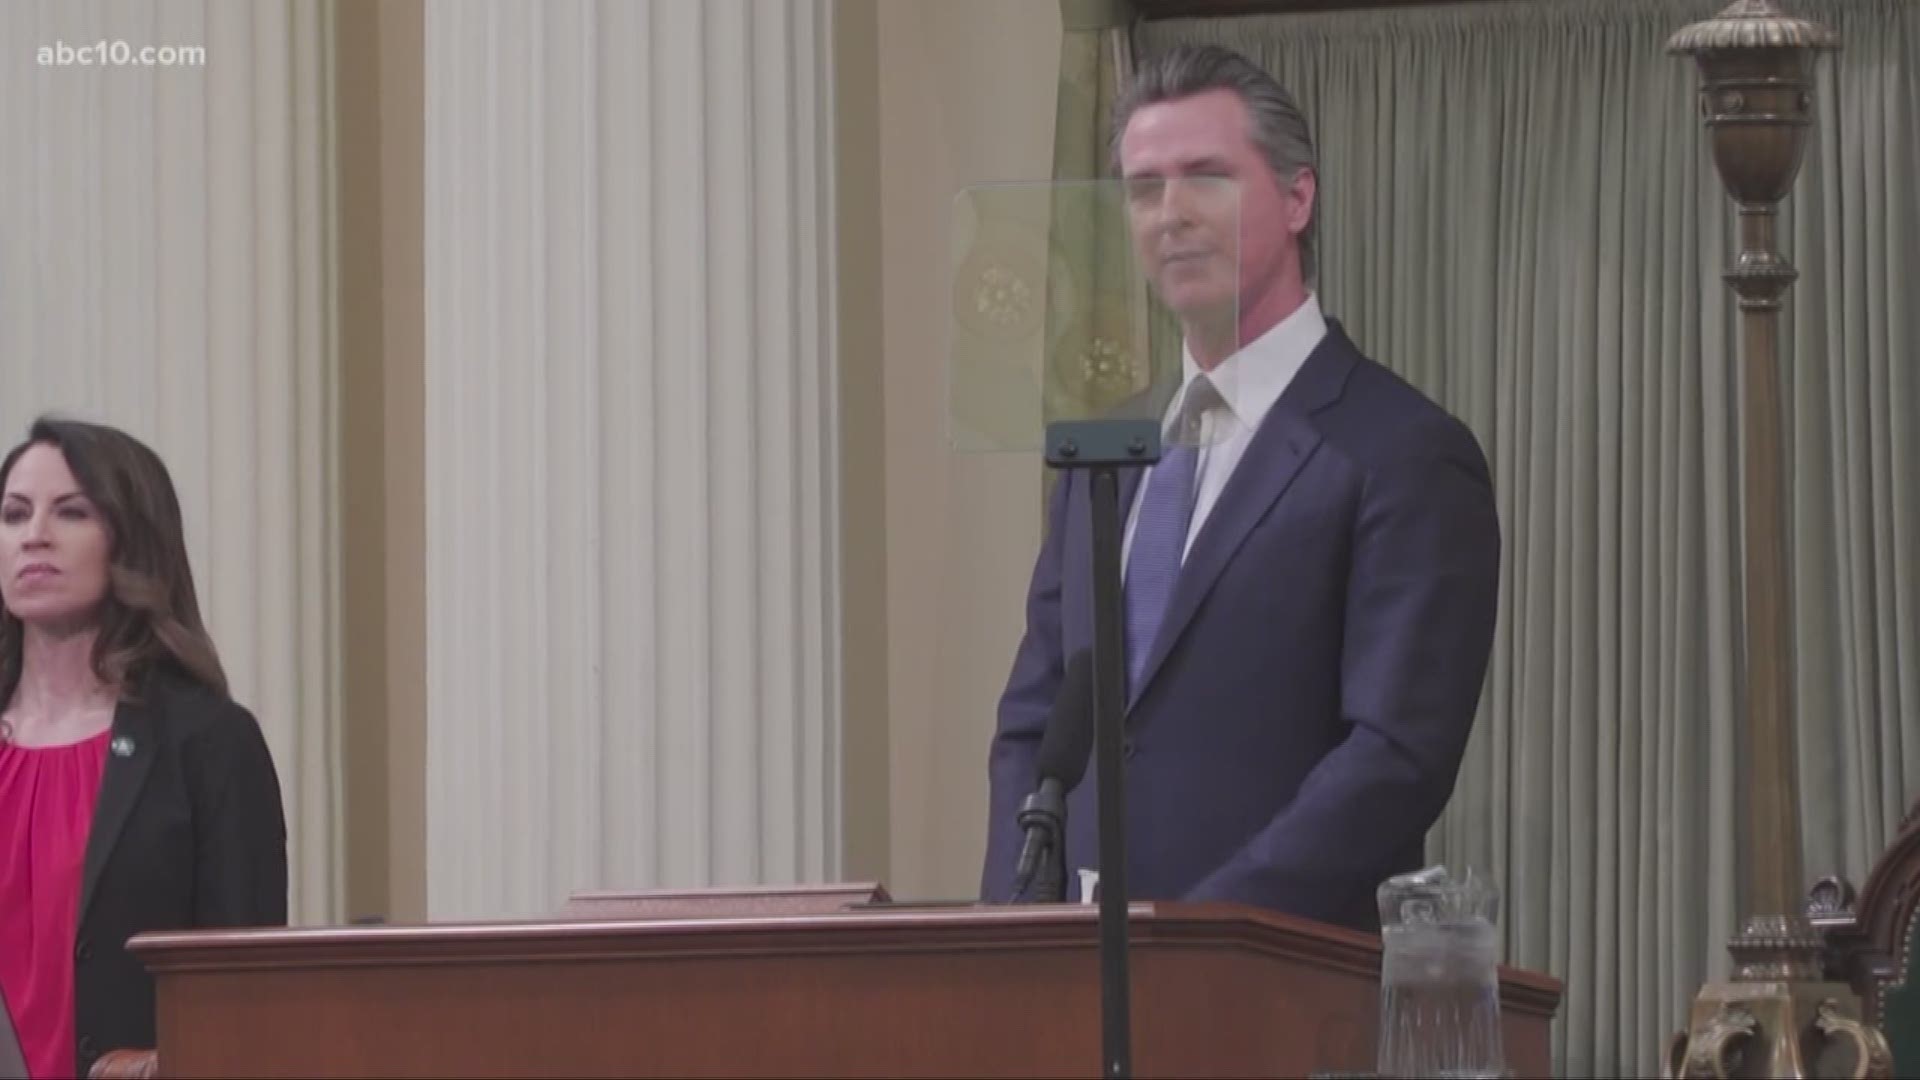 California Gov. Newsom gave his second State of the State address on Wednesday at the state capitol, where he dedicated most of his speech to the homeless crisis.